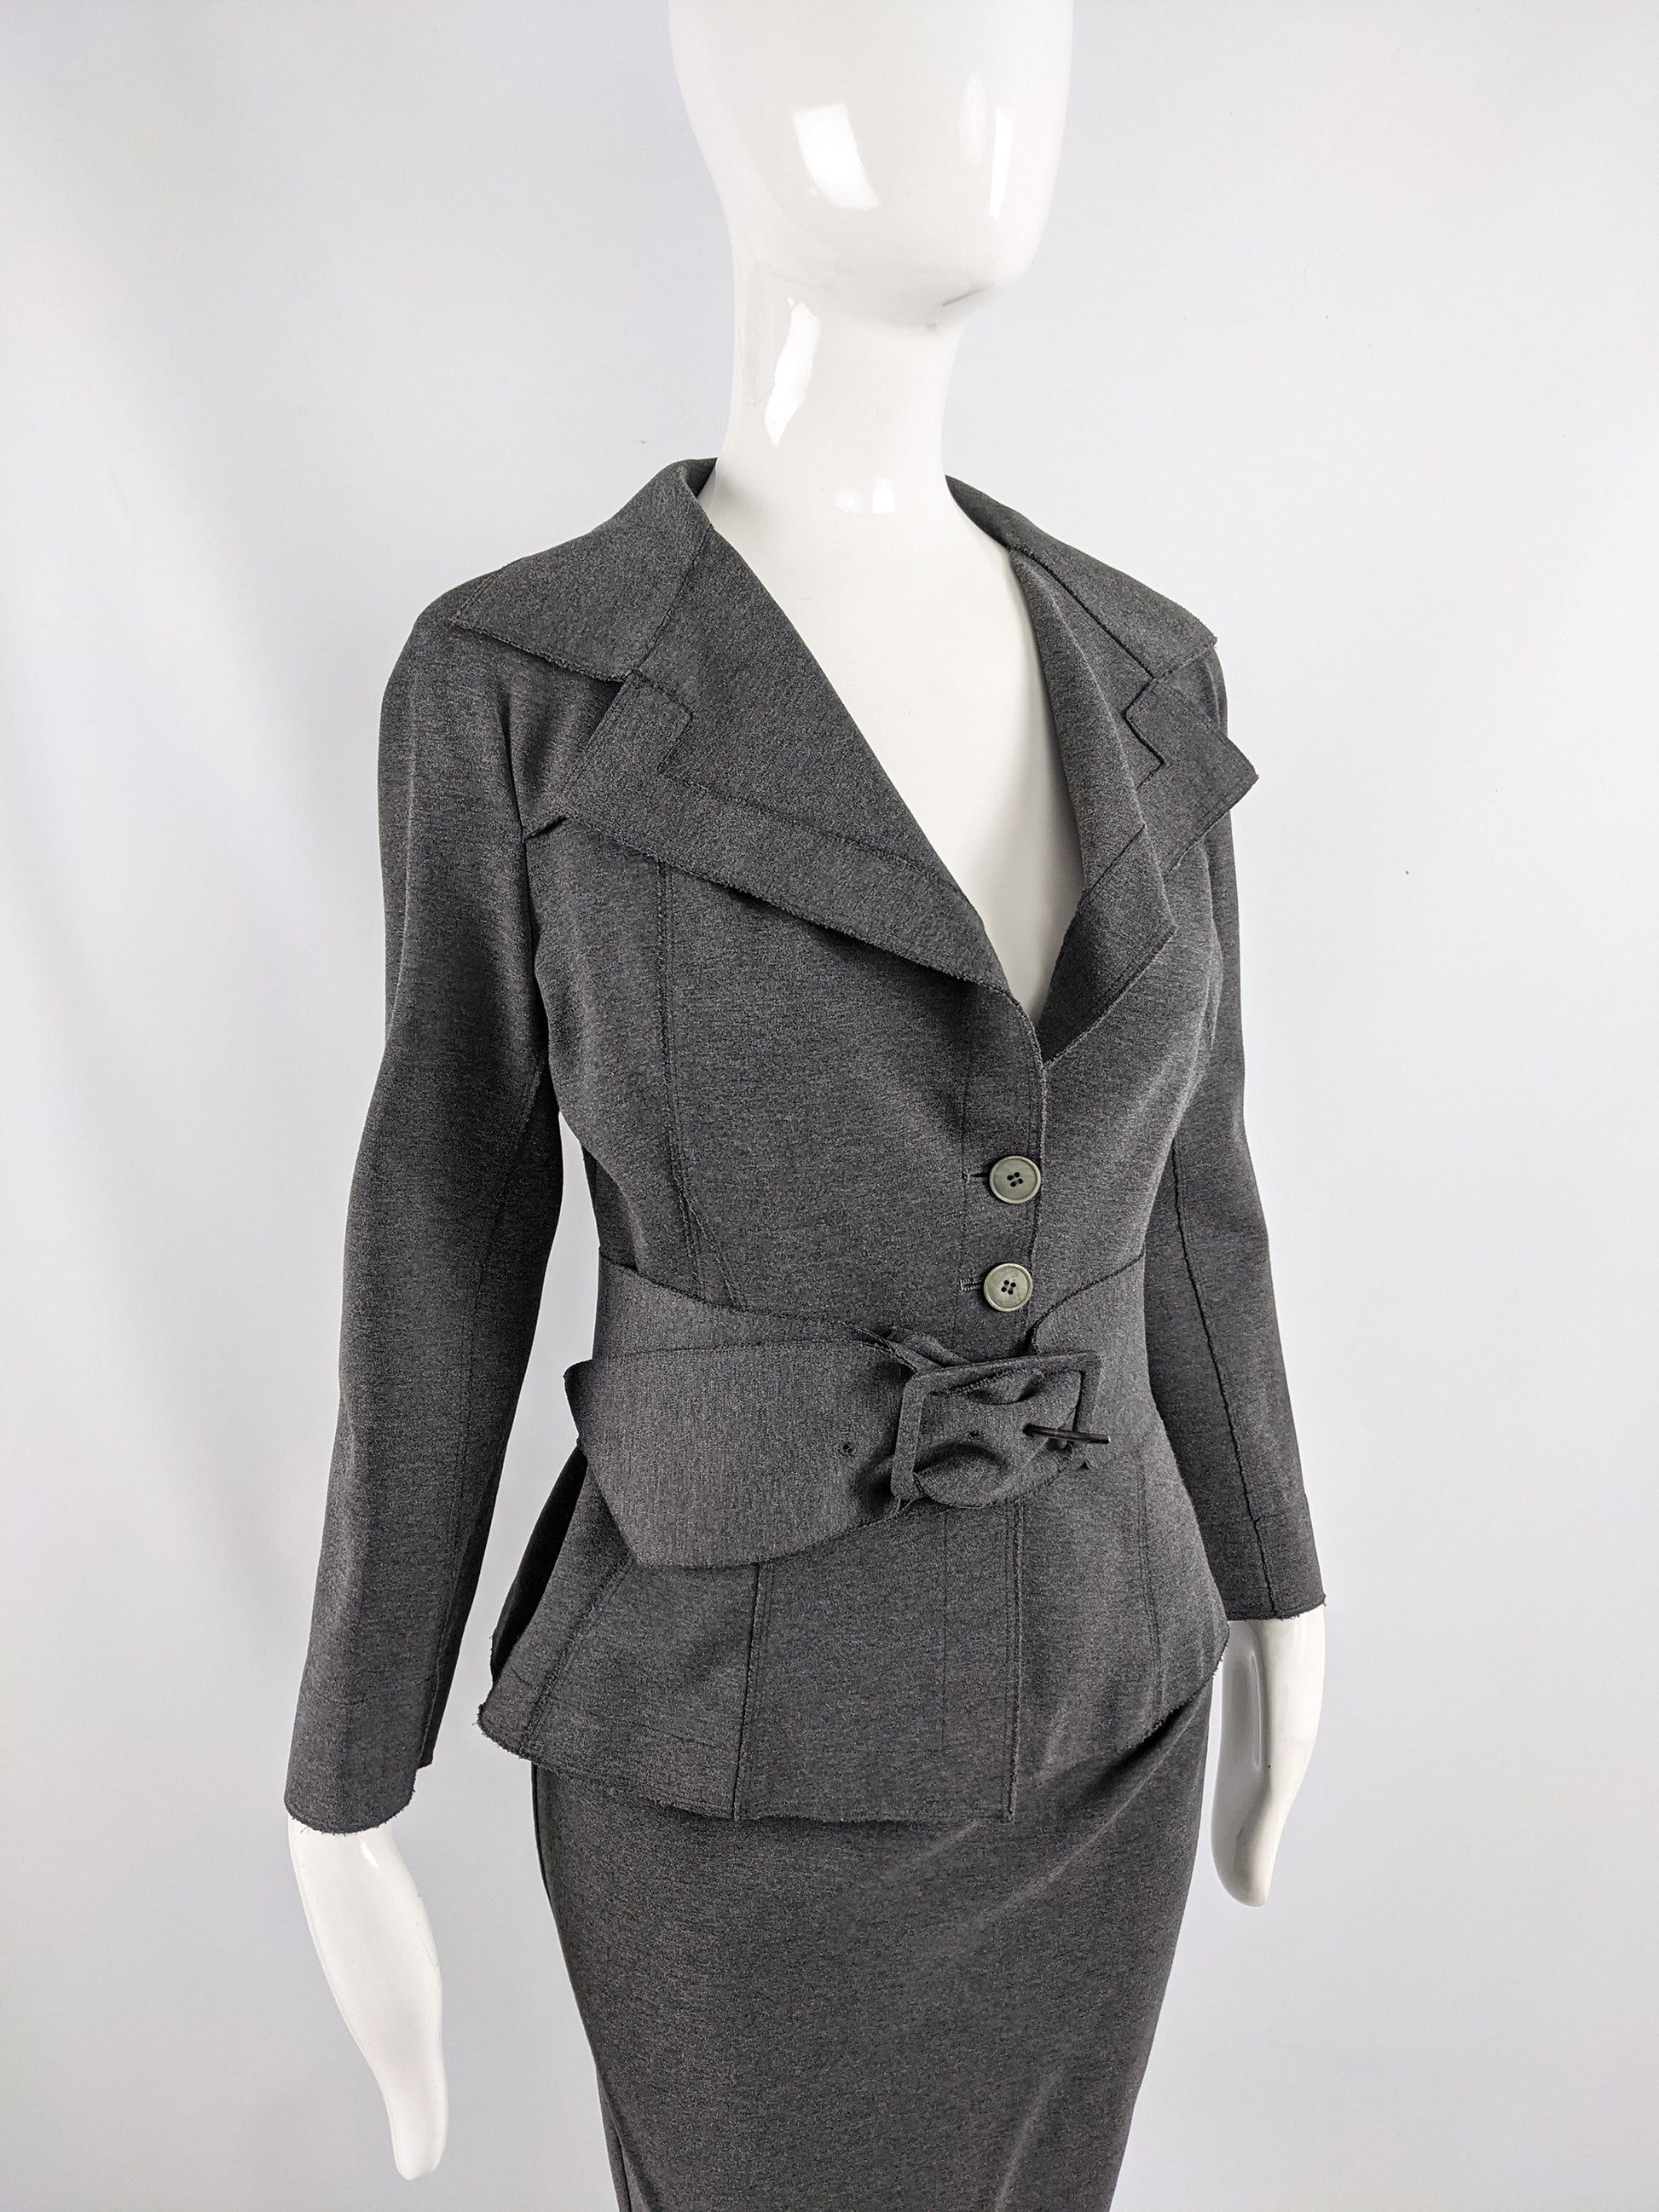 A vintage skirt suit by Donna Karan with a matching blazer, pencil skirt and a wide belt.